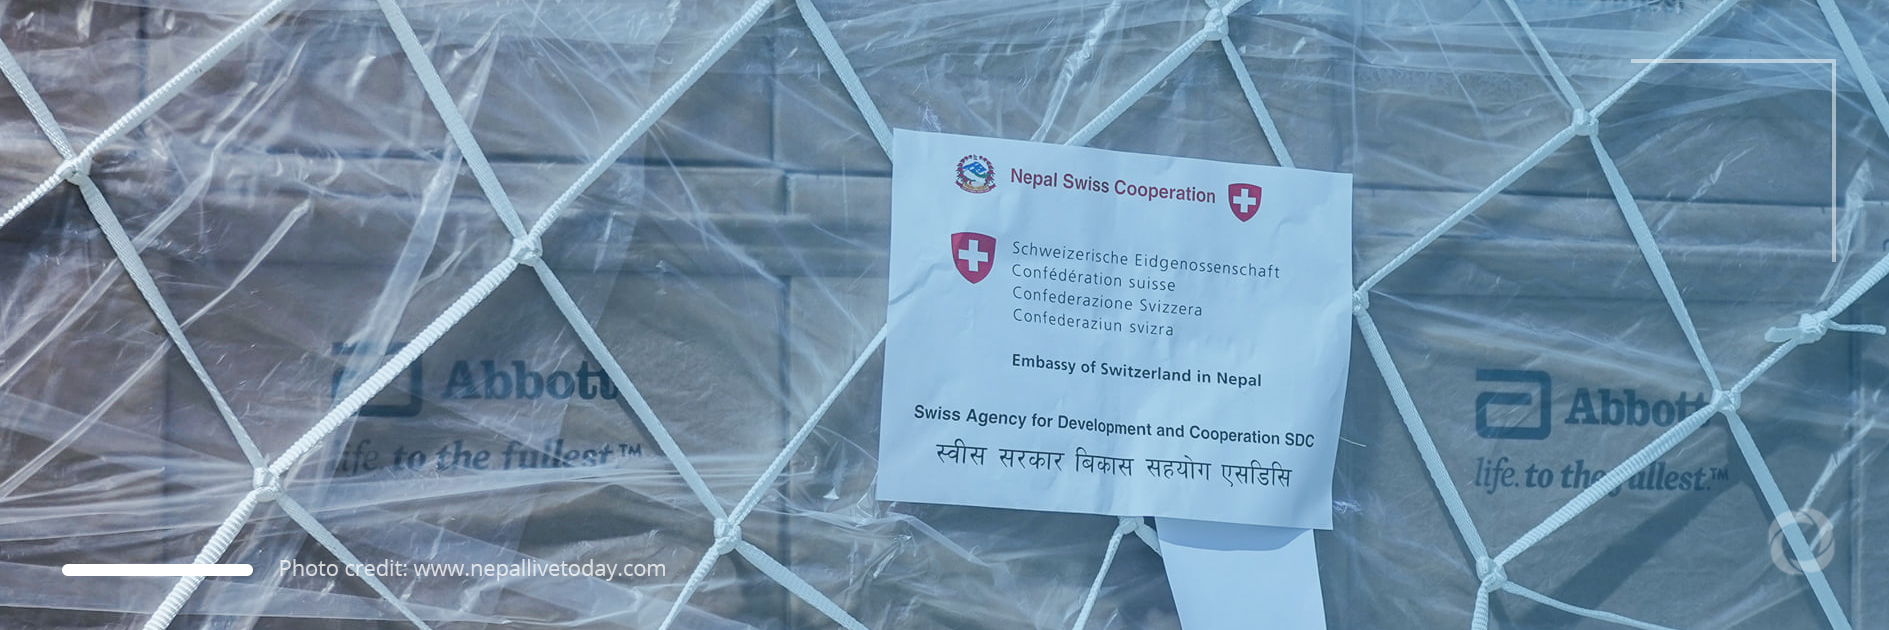 Switzerland provides medical supplies to Nepal to tackle the devastating COVID-19 crisis